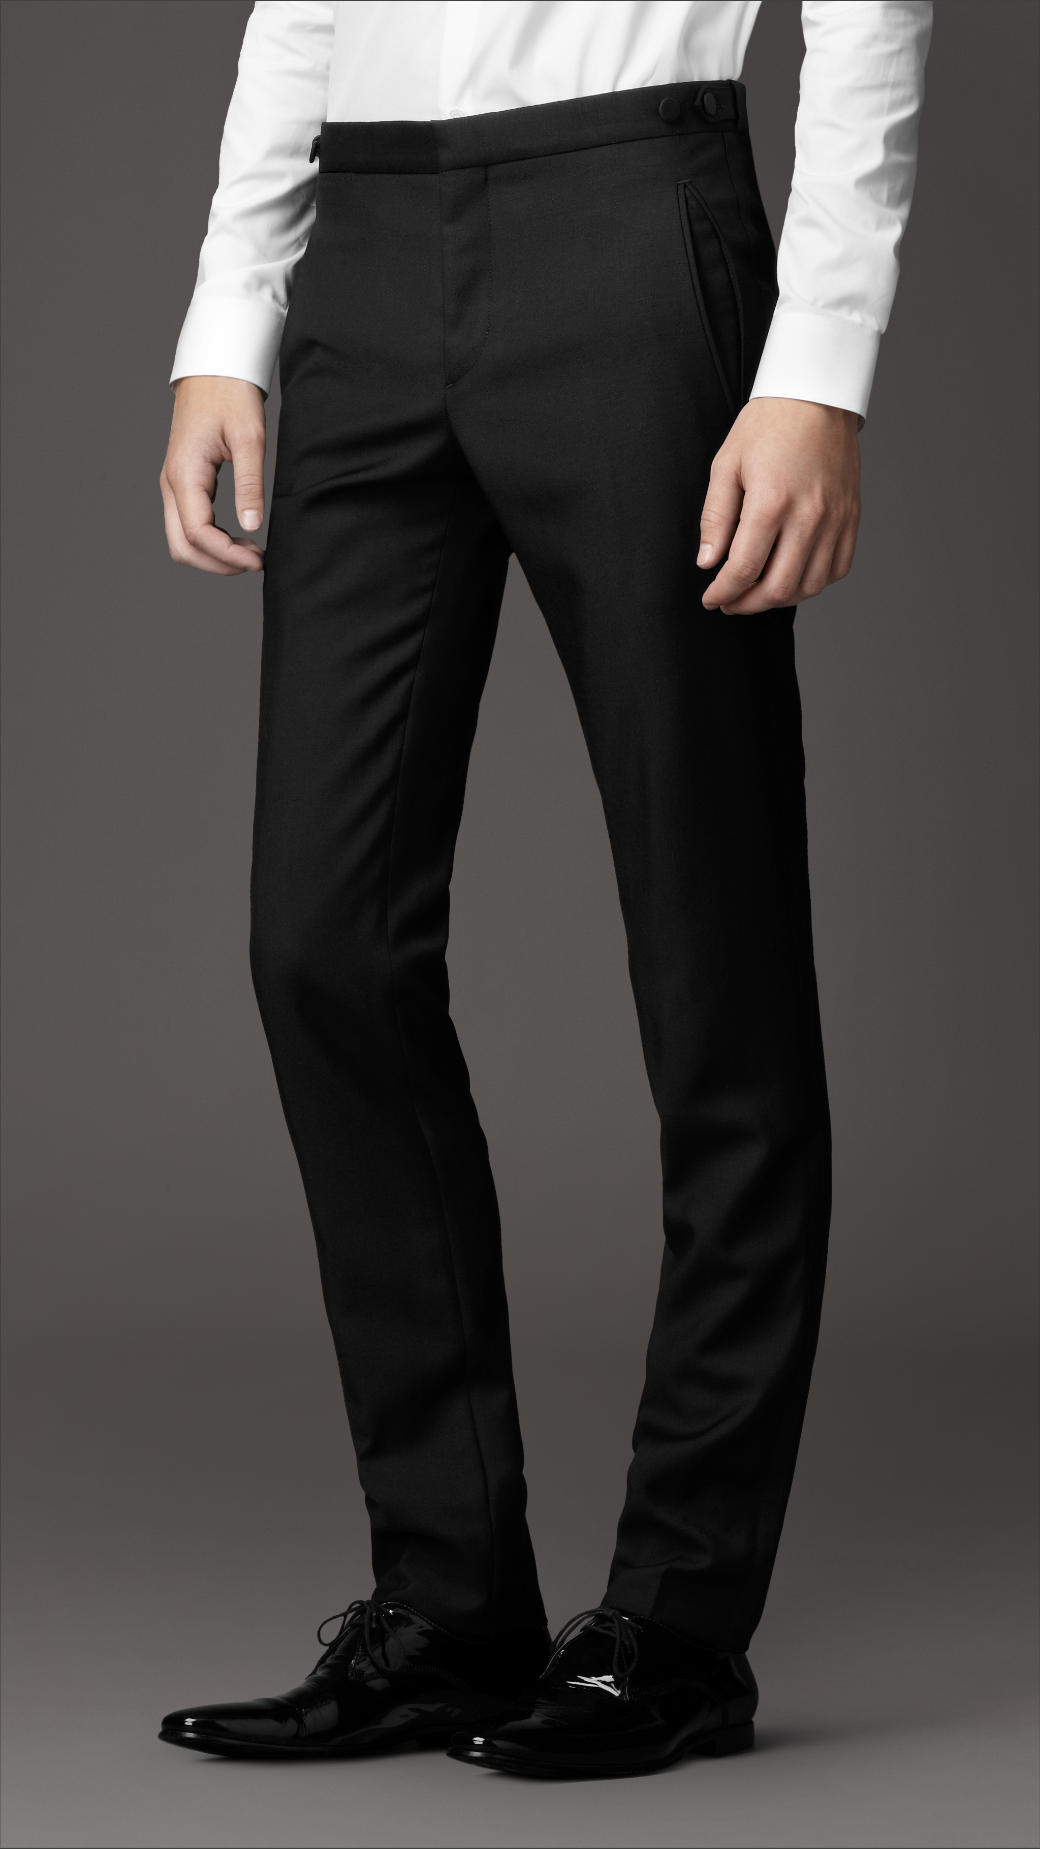 Burberry Slim Fit Evening Trousers in Black for Men - Lyst